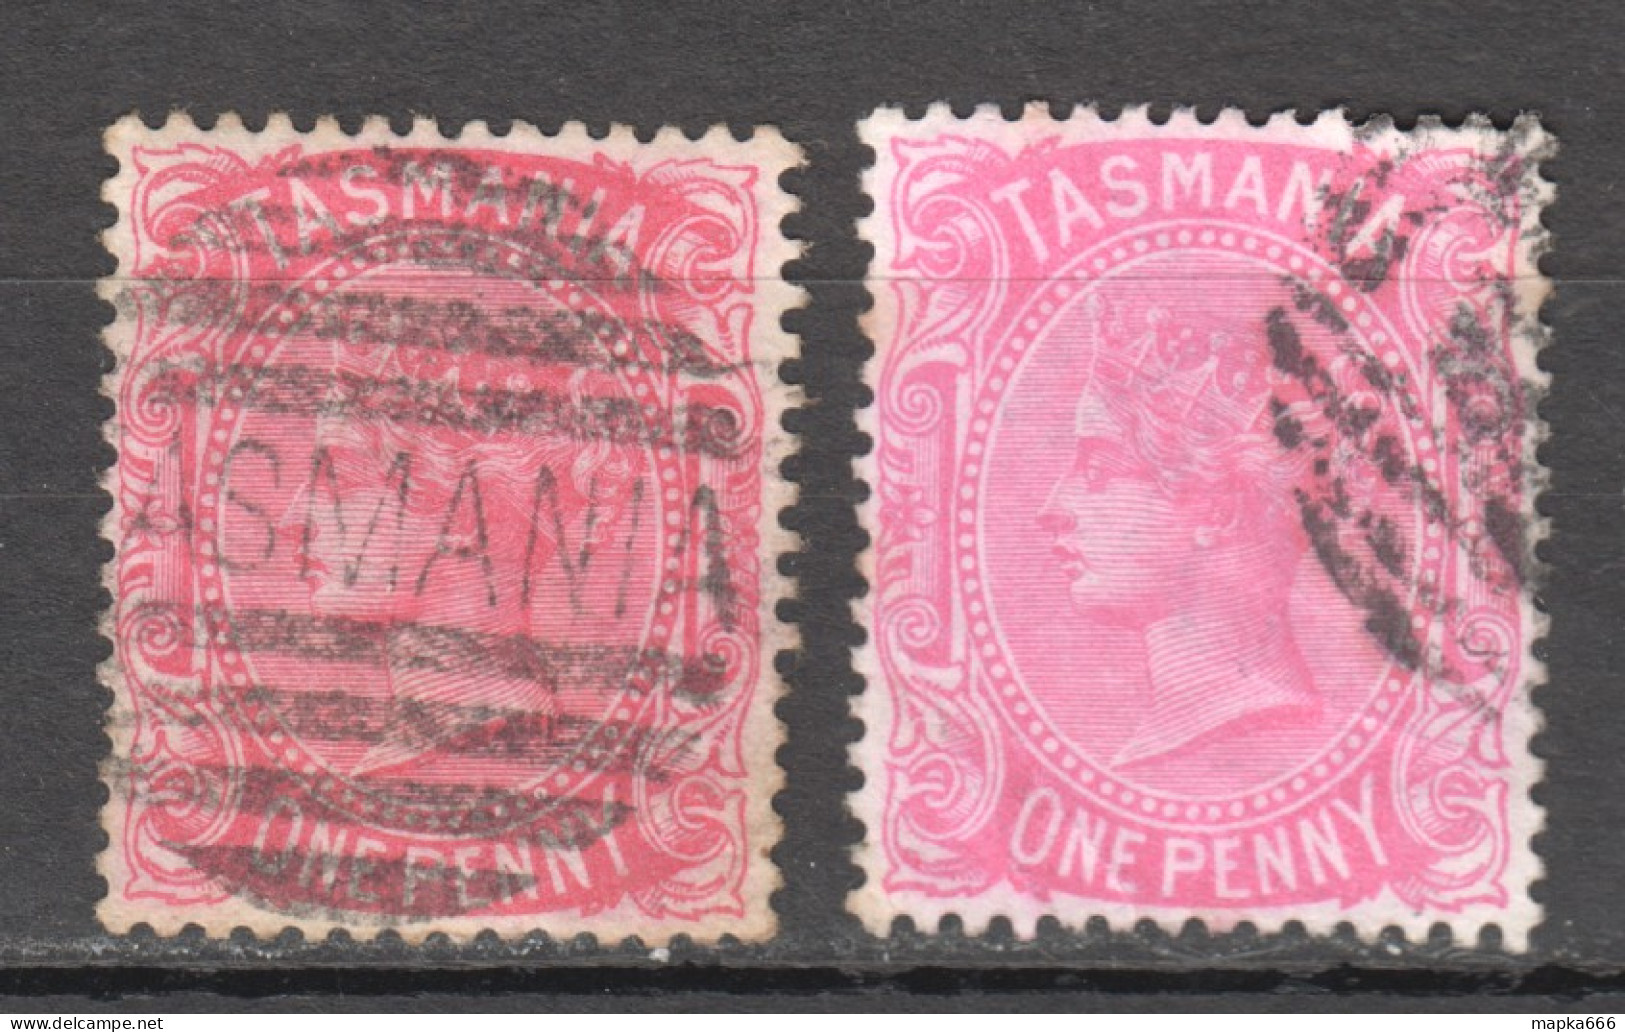 Tas127 1878 Australia Tasmania One Penny Gibbons Sg #156 2St Used Different Tints - Used Stamps